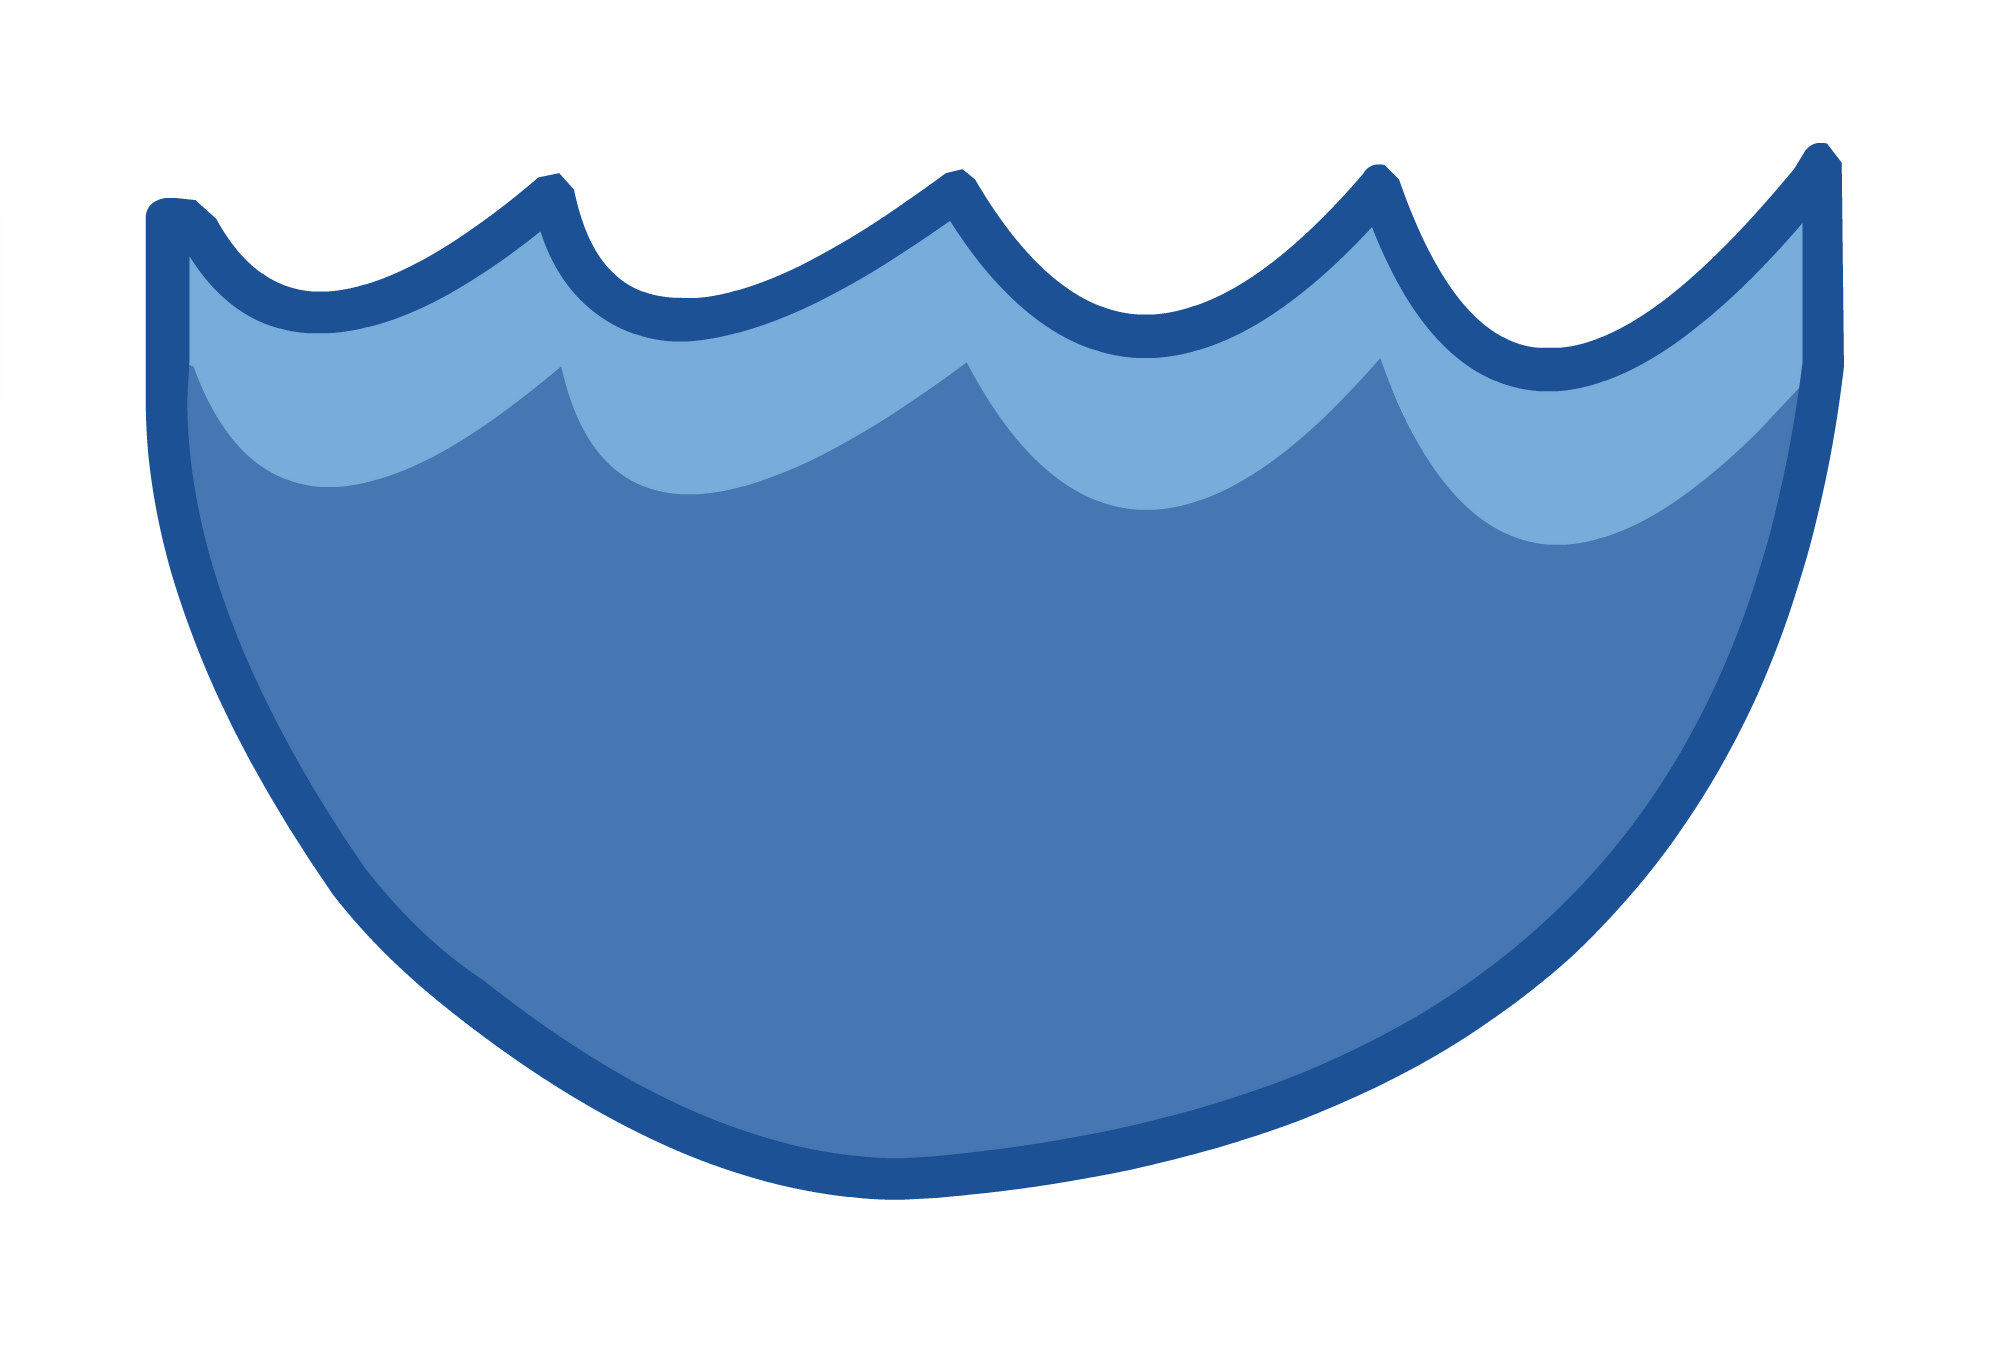 https://static.wikia.nocookie.net/clubpenguin/images/5/53/Waterlogo.png/revision/latest/scale-to-width-down/1992?cb=20130511080351